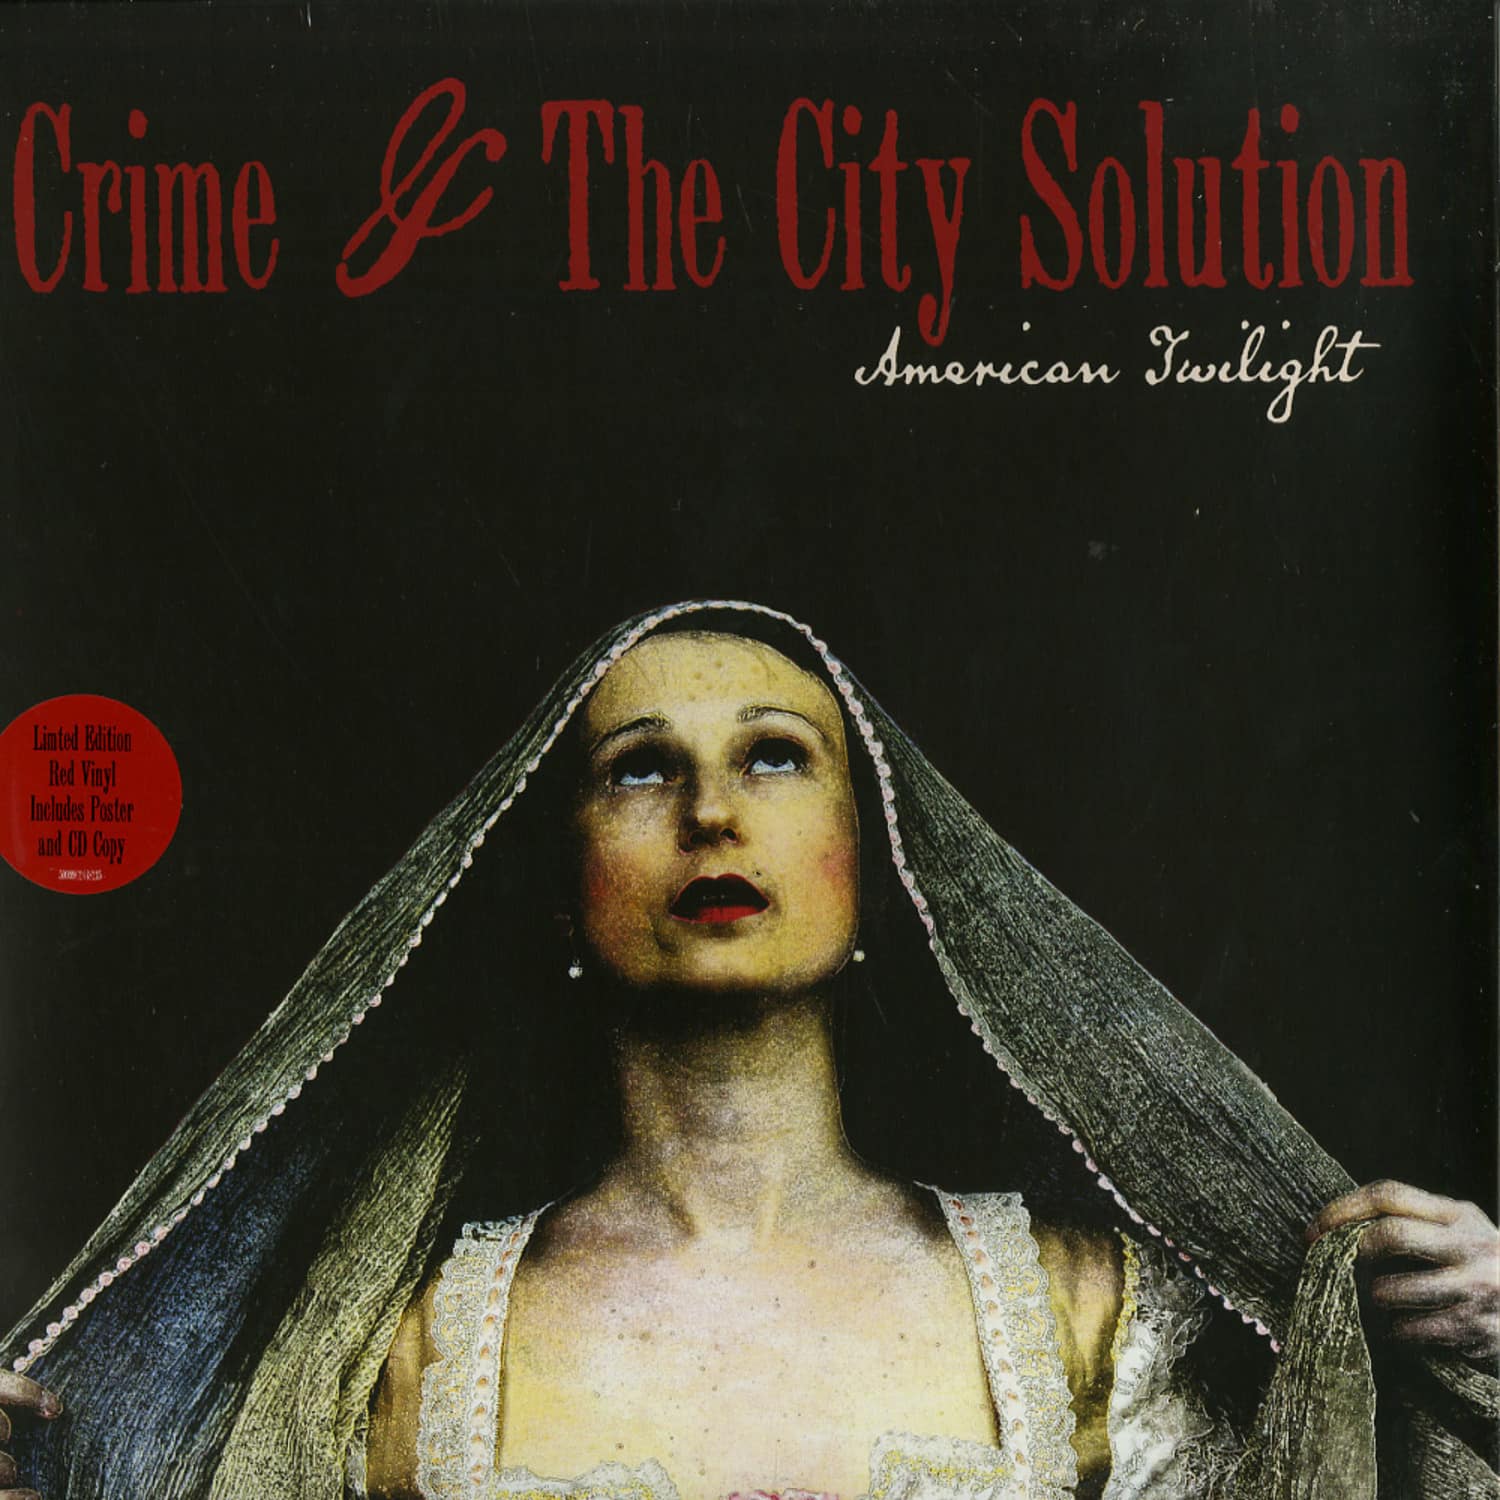 Crime & The City Solution - AMERICAN TWILIGHT 